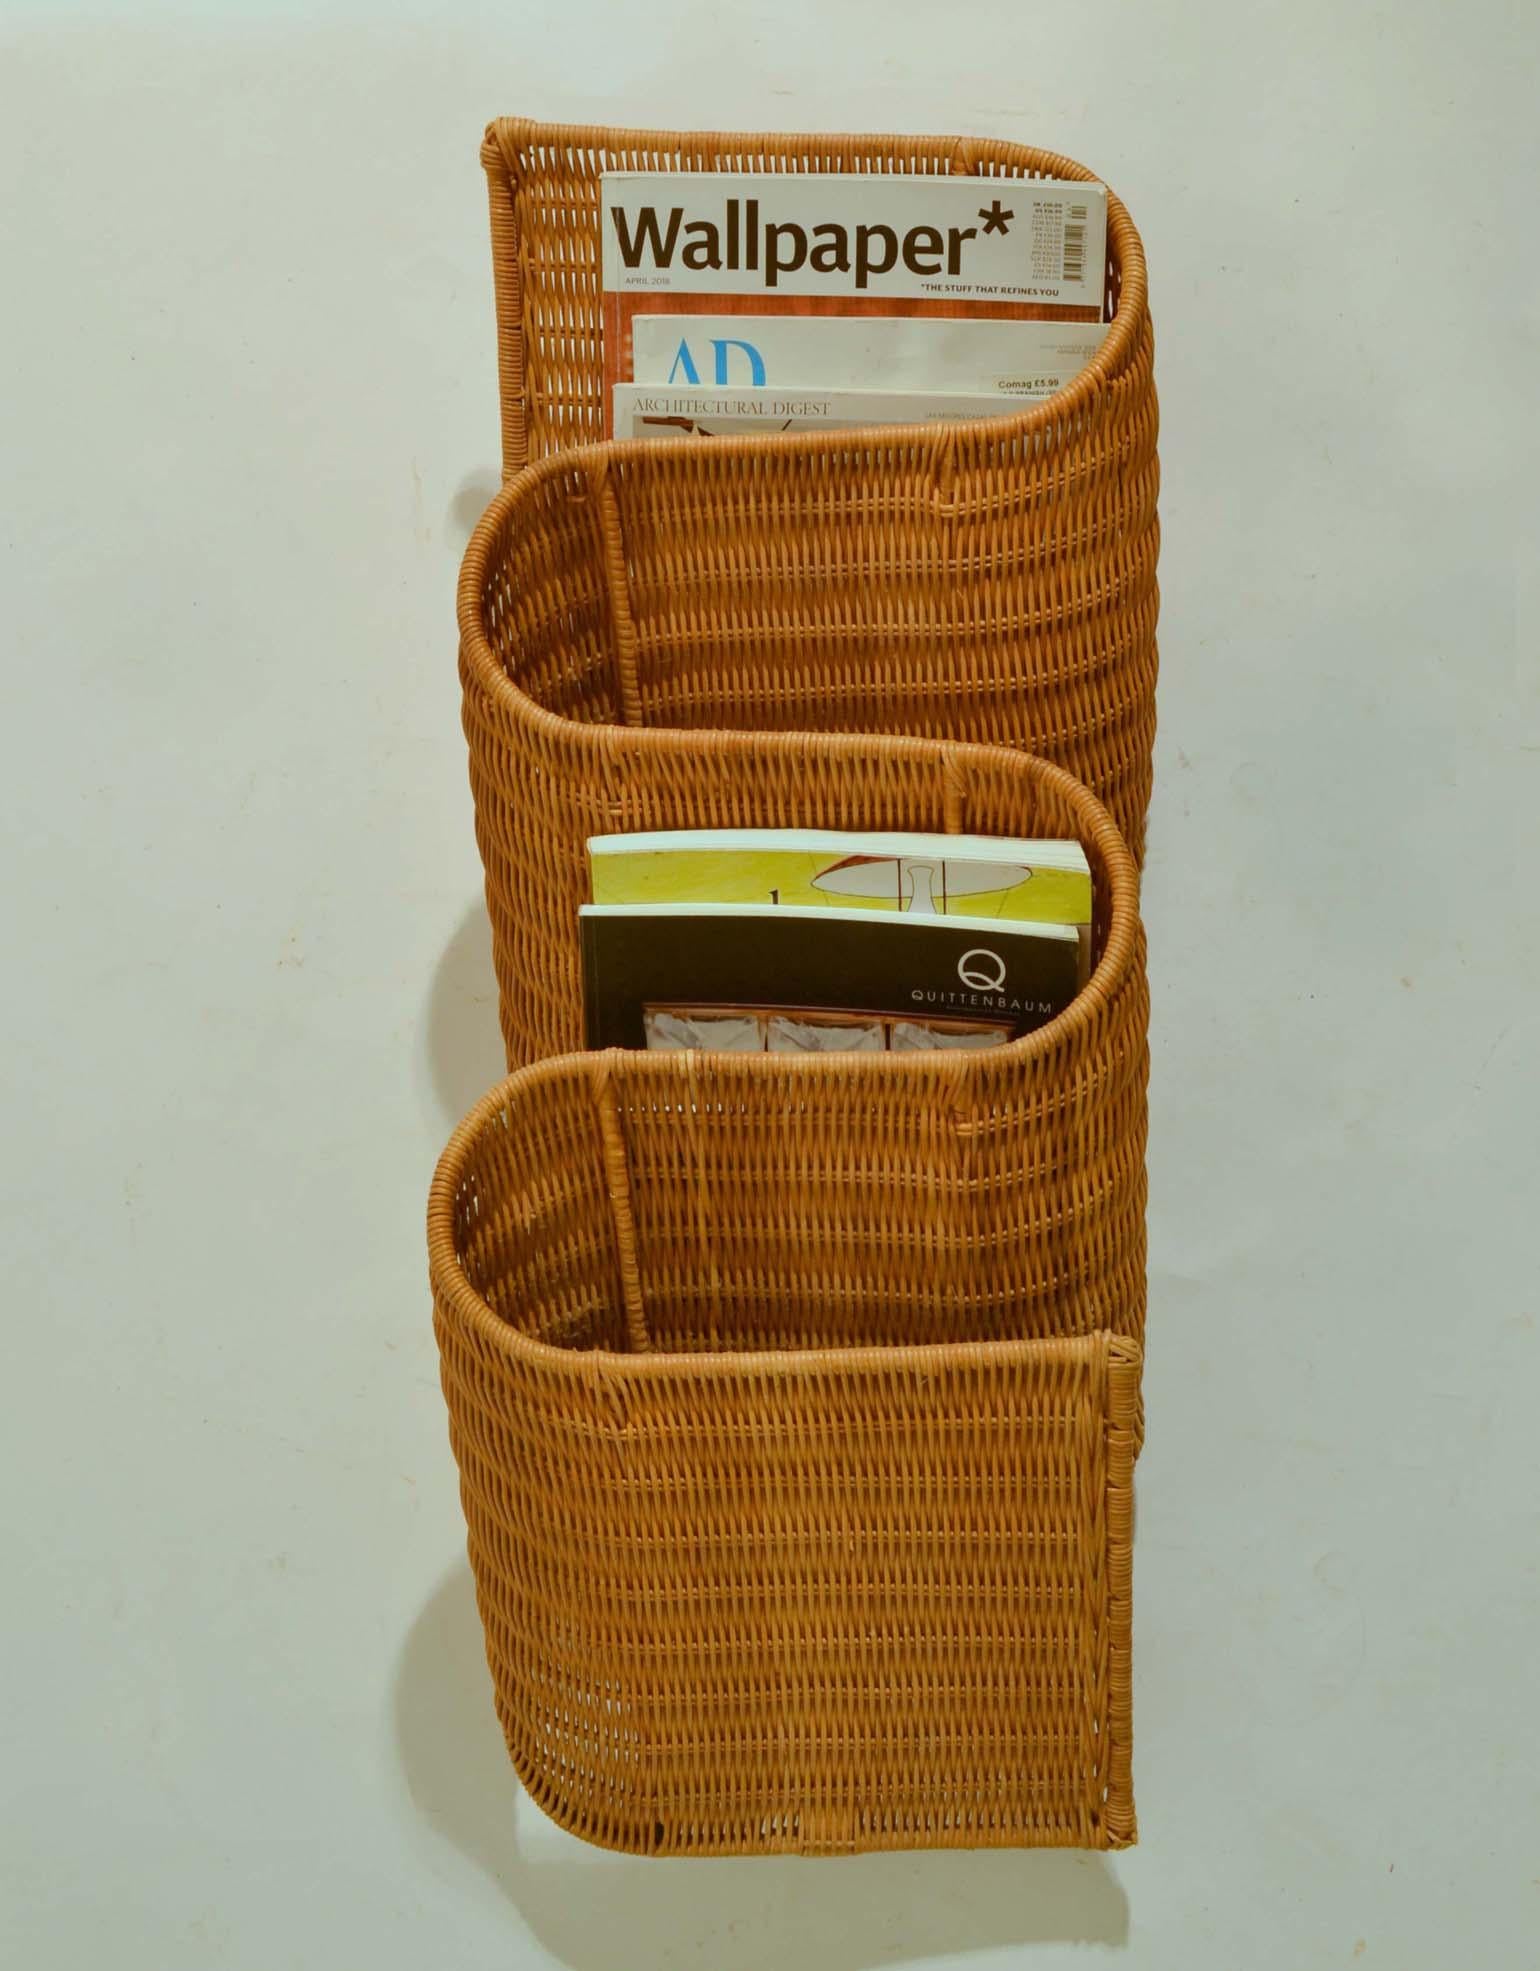 Wall mounted rattan hand woven magazine holders, very efficient and decorative, the way it snakes along the wall. It has 4 sections for magazines. And is made in Italy, 1960s-1970s.